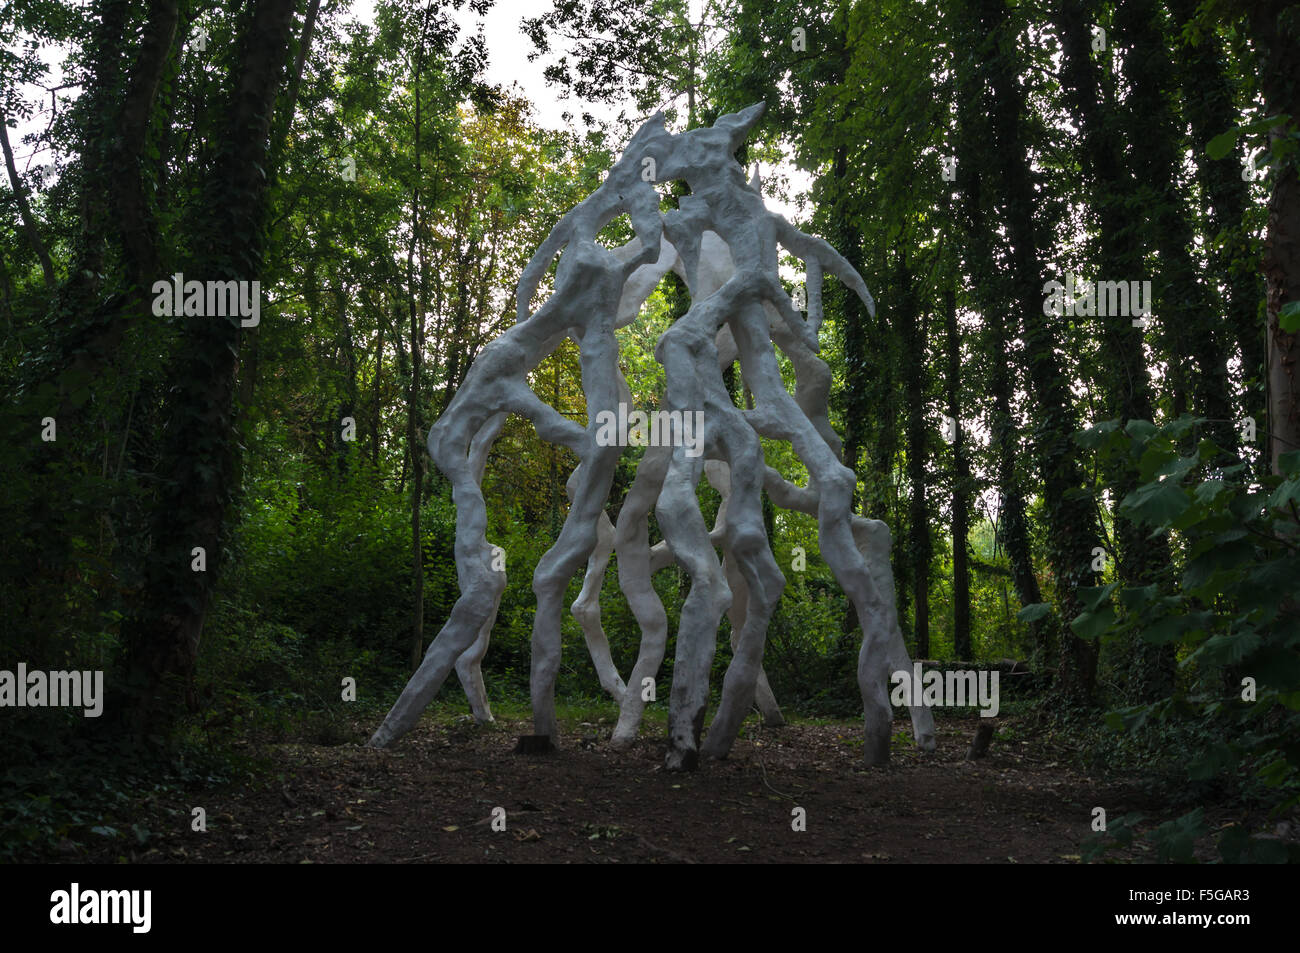 Souche art installation by Yuhsin U Chang, Hortillonnages, Amiens, Somme, Picardie, France Stock Photo